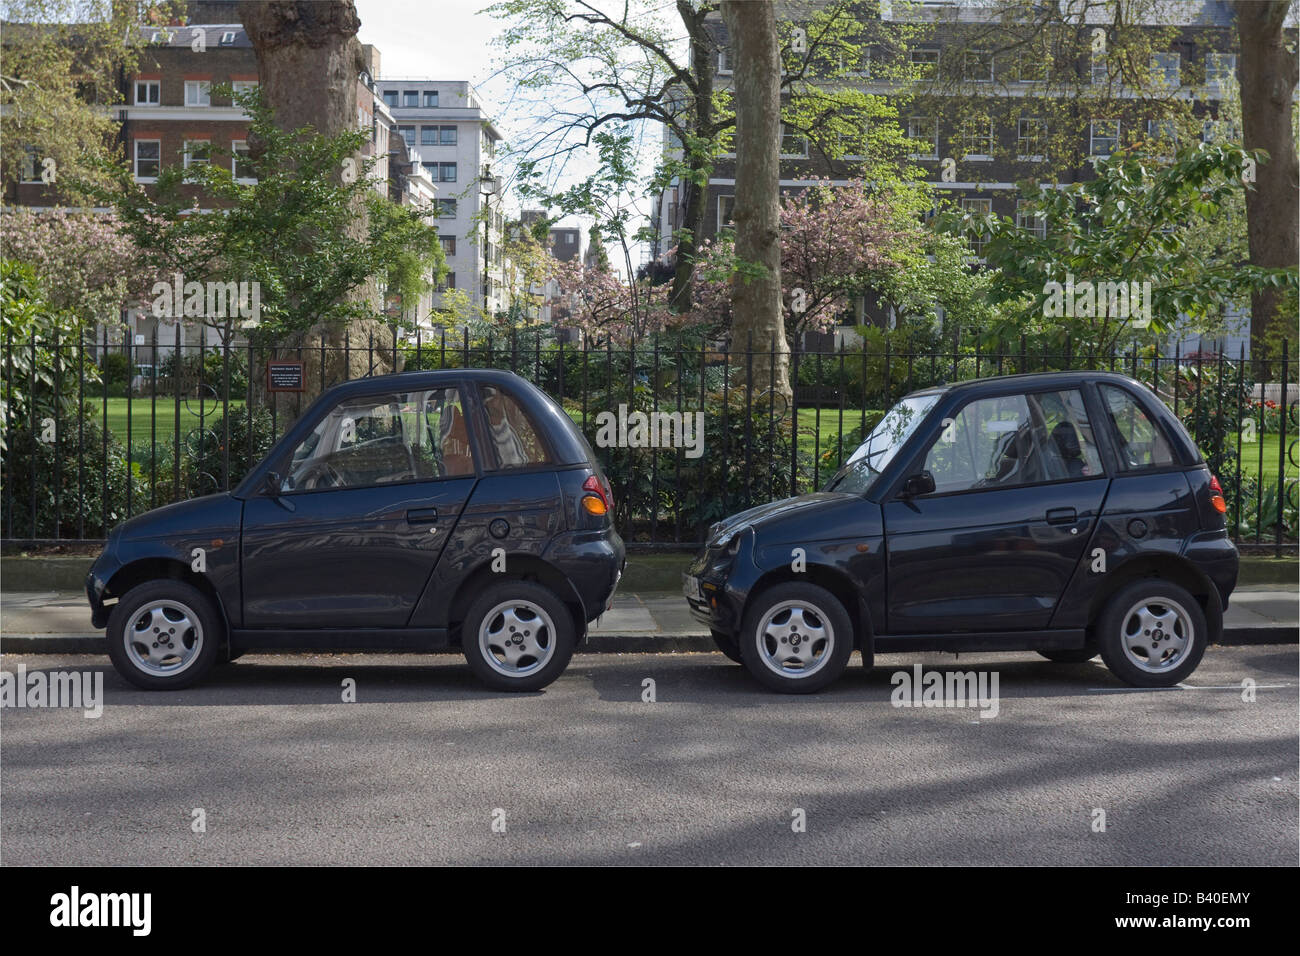 2 Reva G-Wiz electric cars parked on one parking space Manchester Square London GB UK Stock Photo